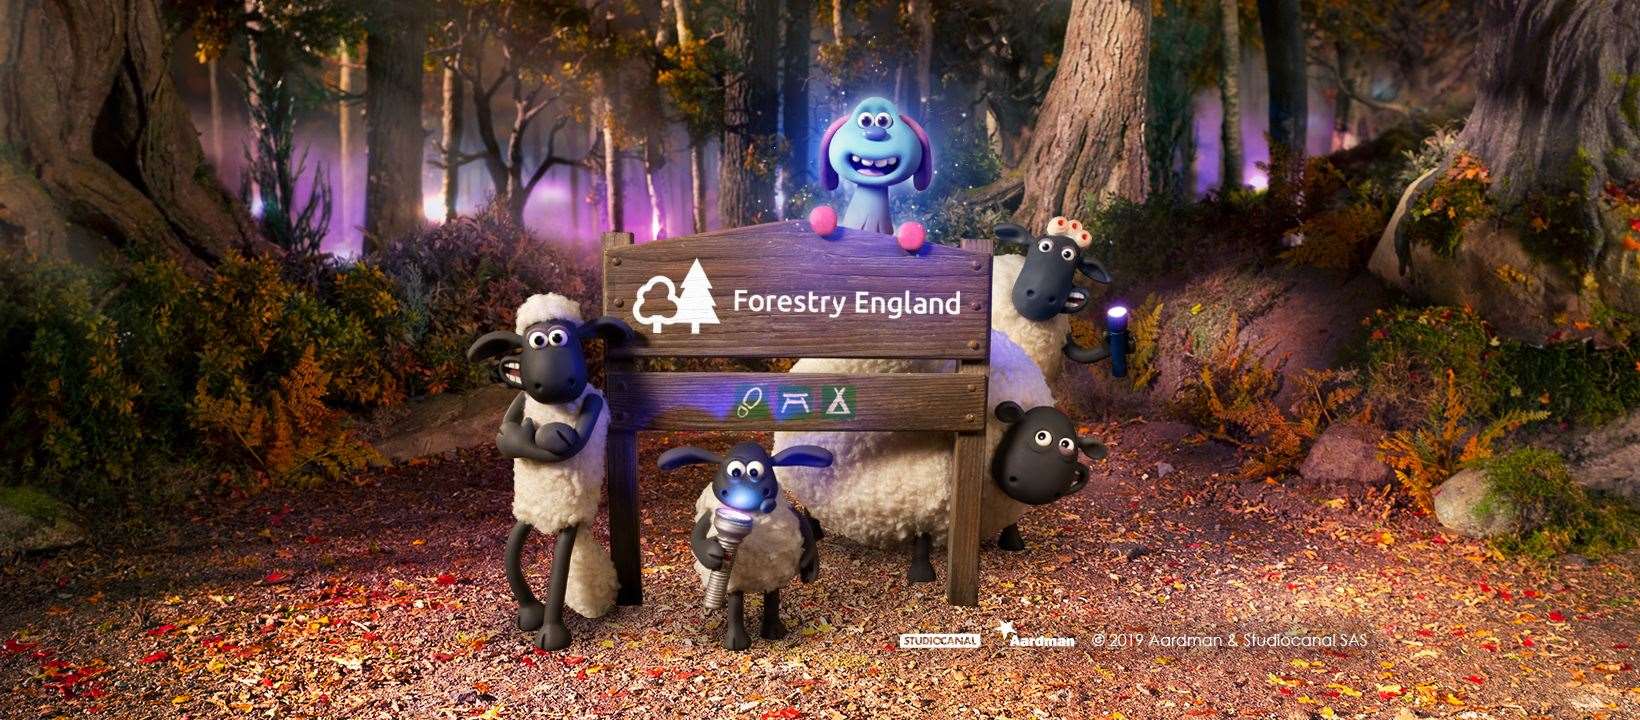 The Shaun the Sheep glow trail can be found at Jeskyns